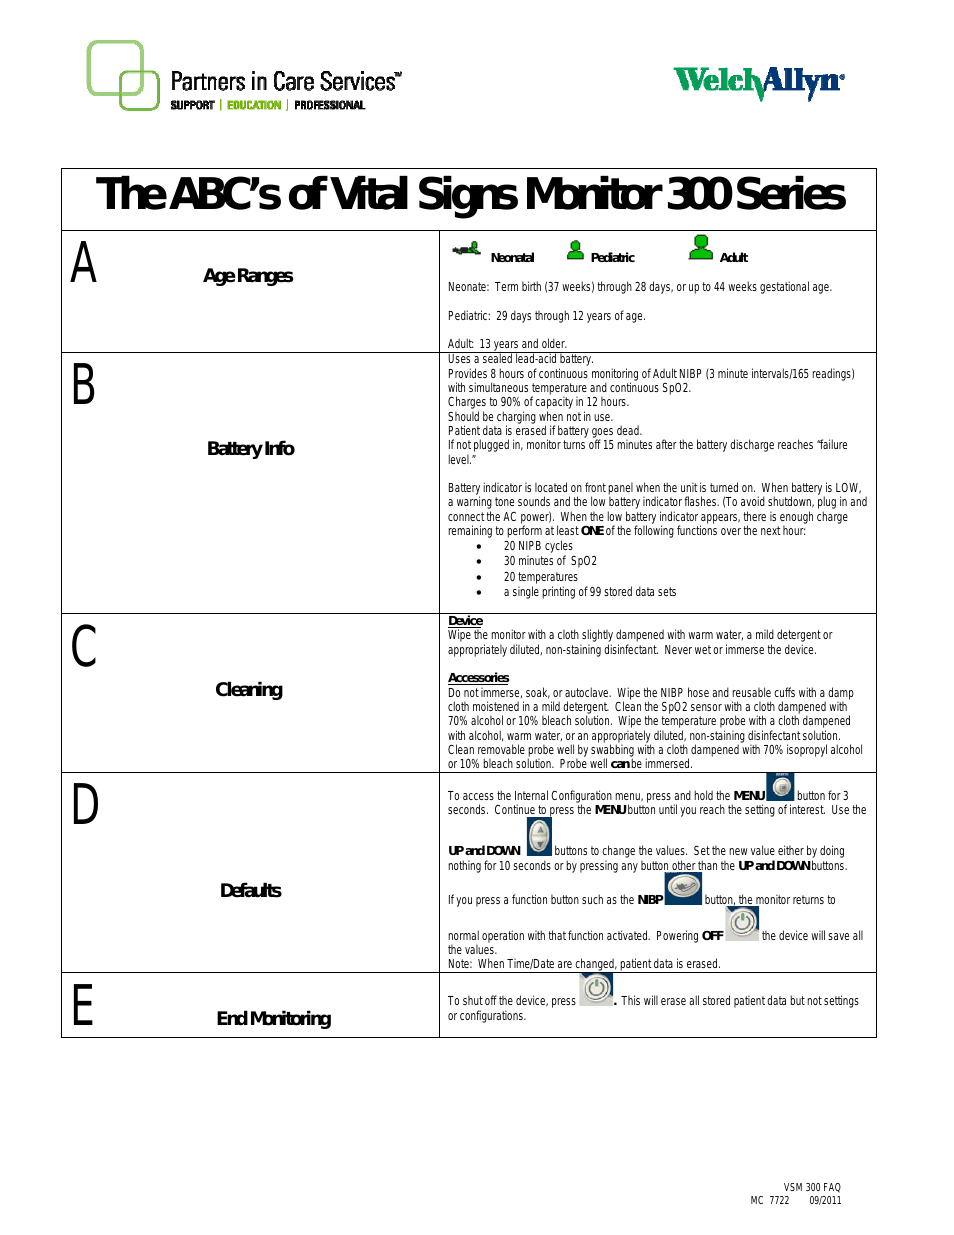 ABCs of Vital Signs Monitor 300 Series - Quick Reference Guide